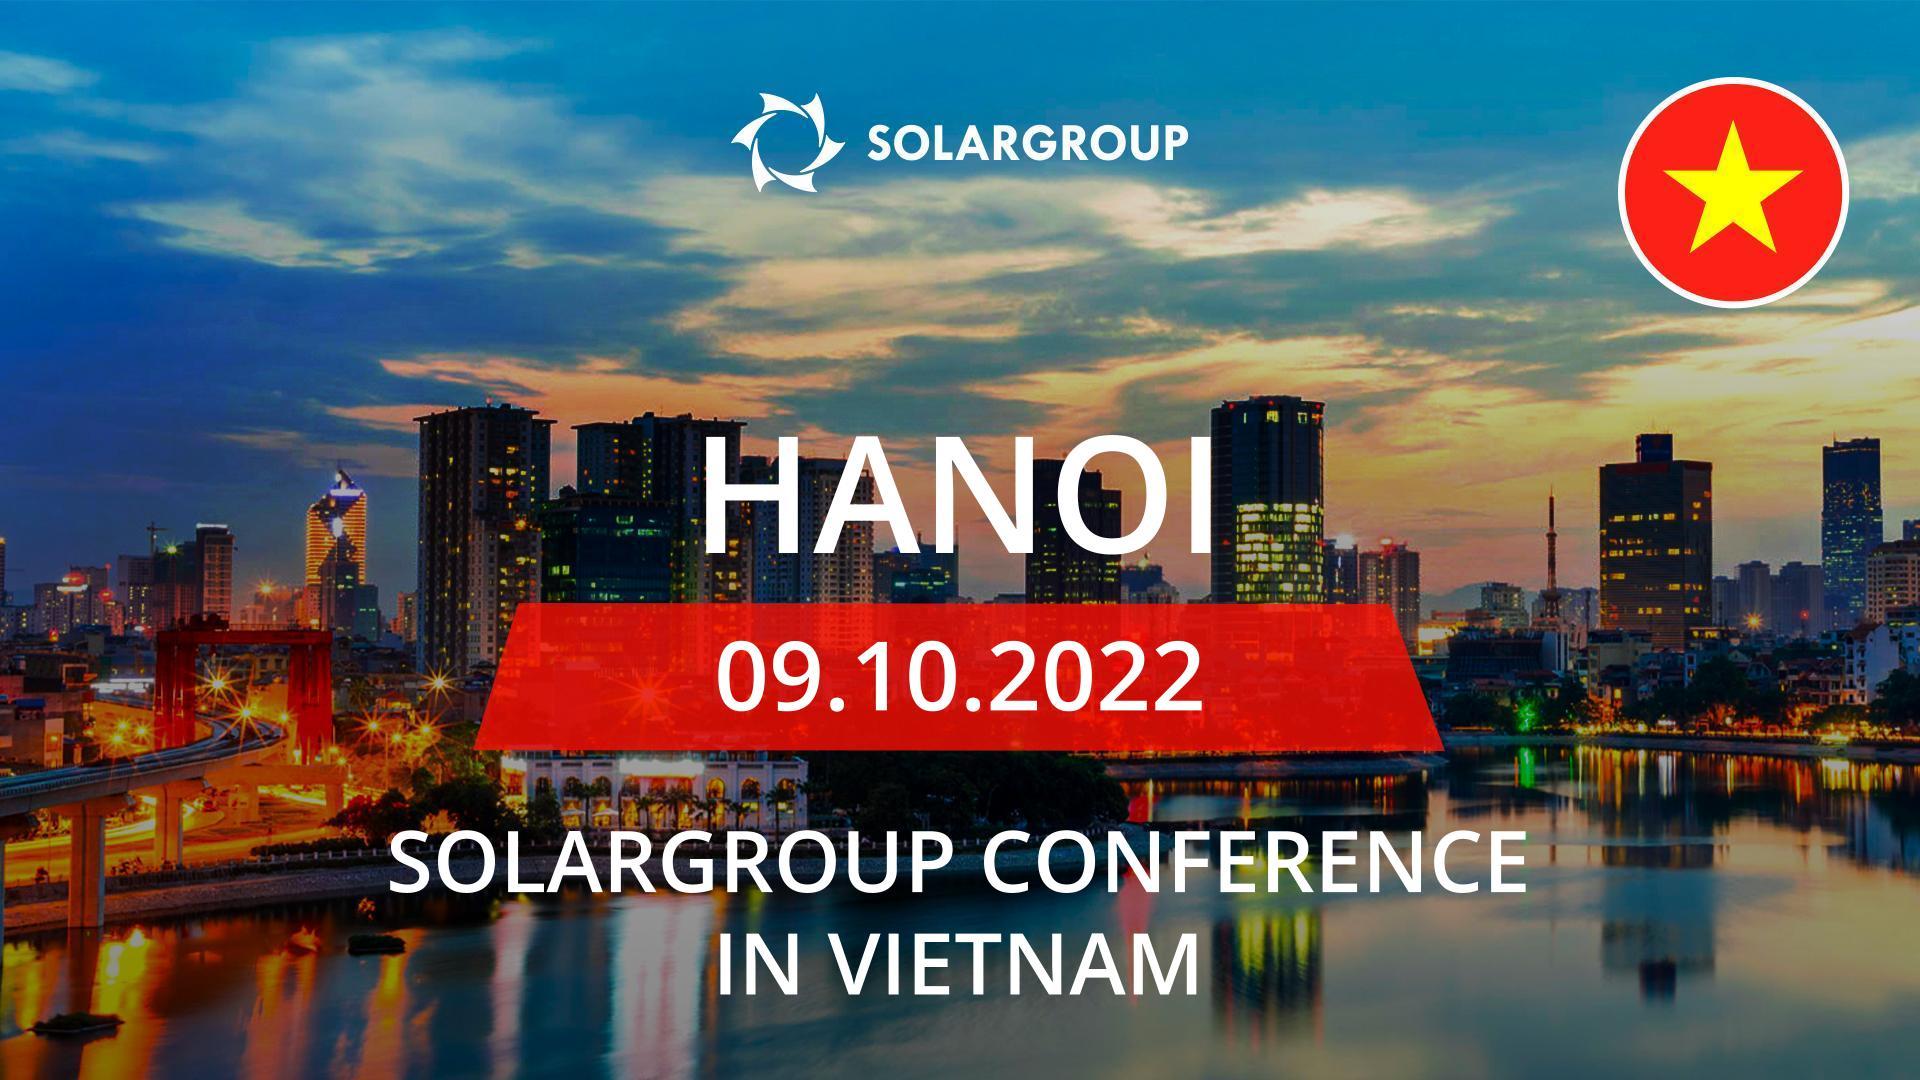 SOLARGROUP conference in Vietnam